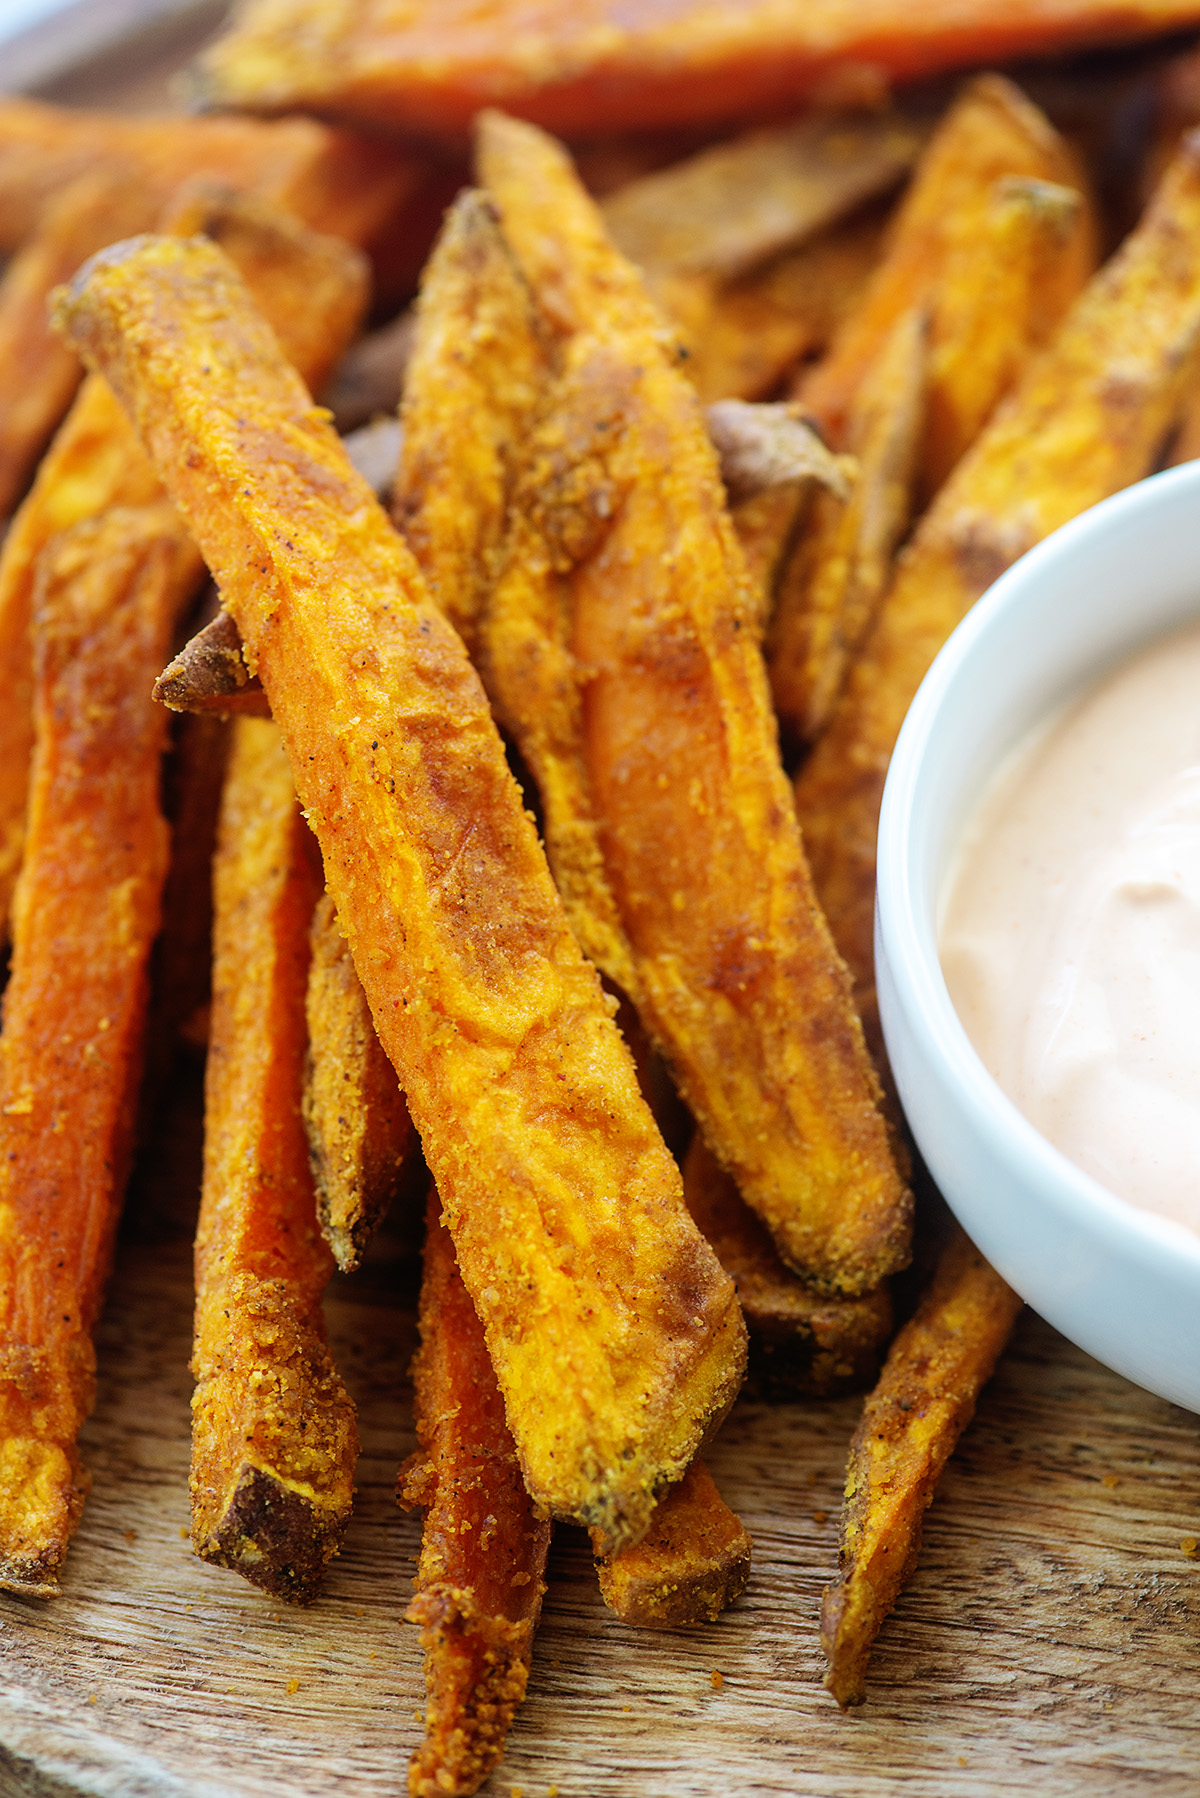 A close up of sweet potato fries on a wooden cutting board next to a bowl of dip.